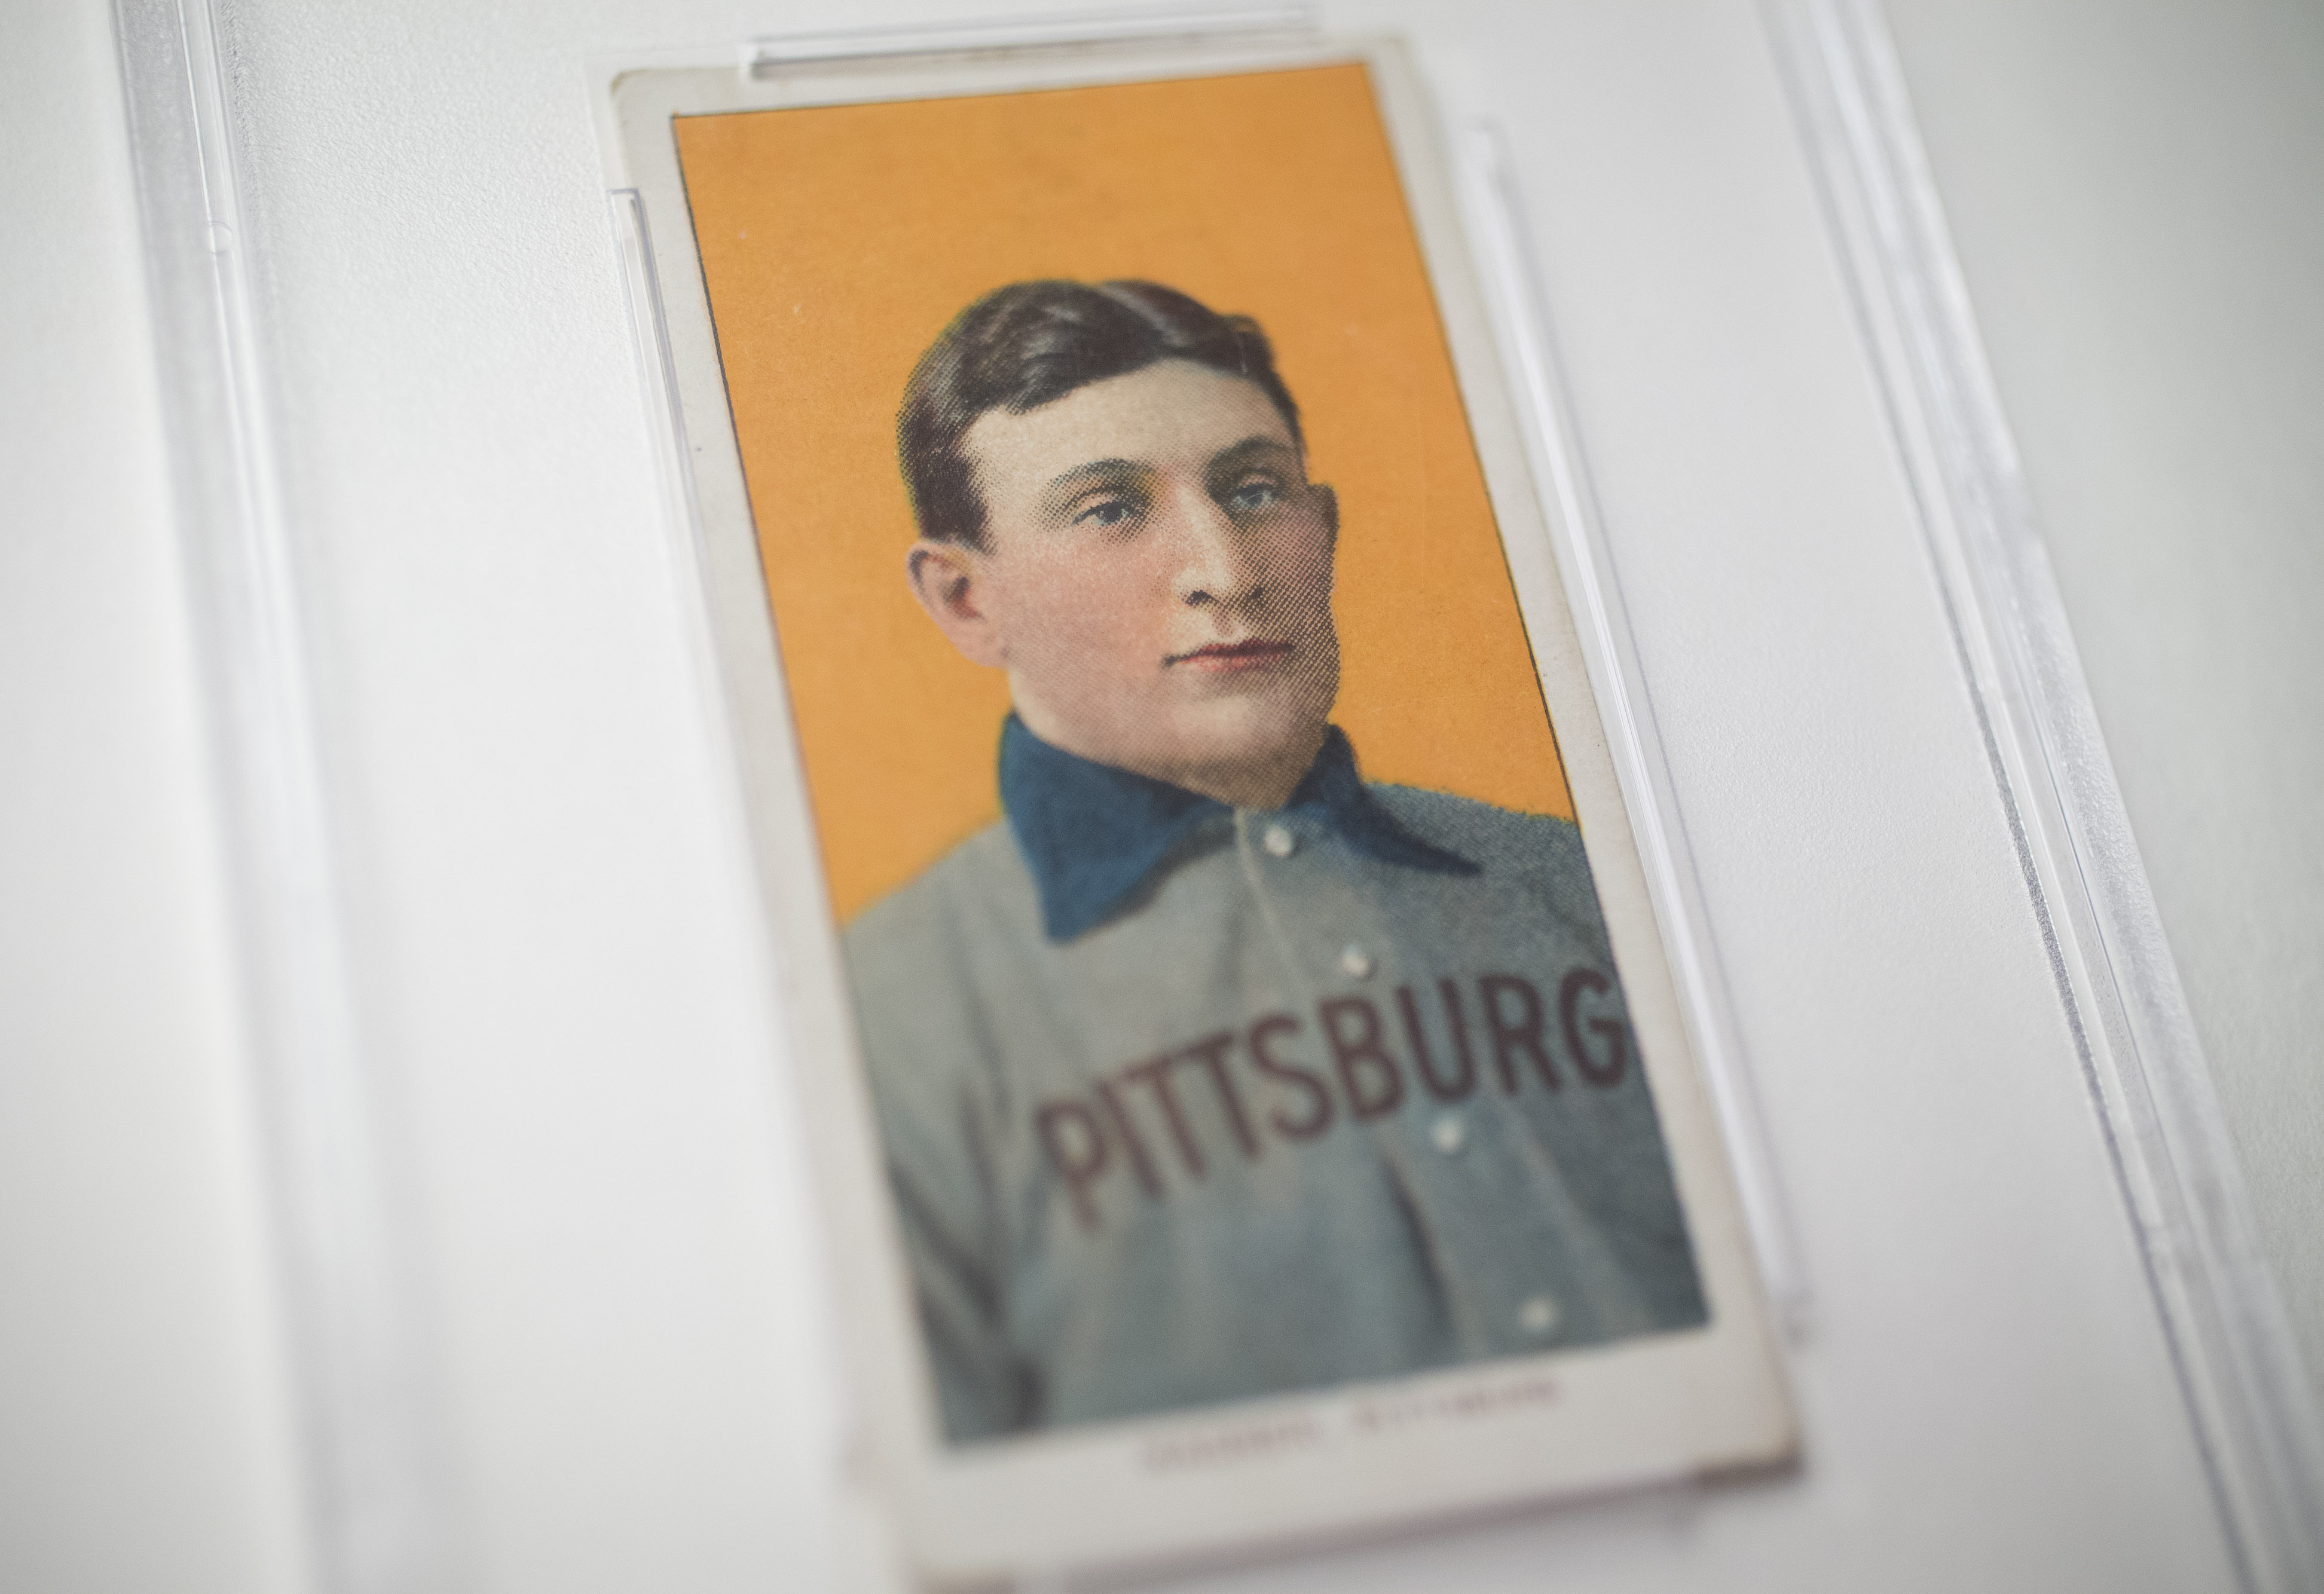 Honus Wagner T206 Card with Sides Cut Off Sells for $1.5M at